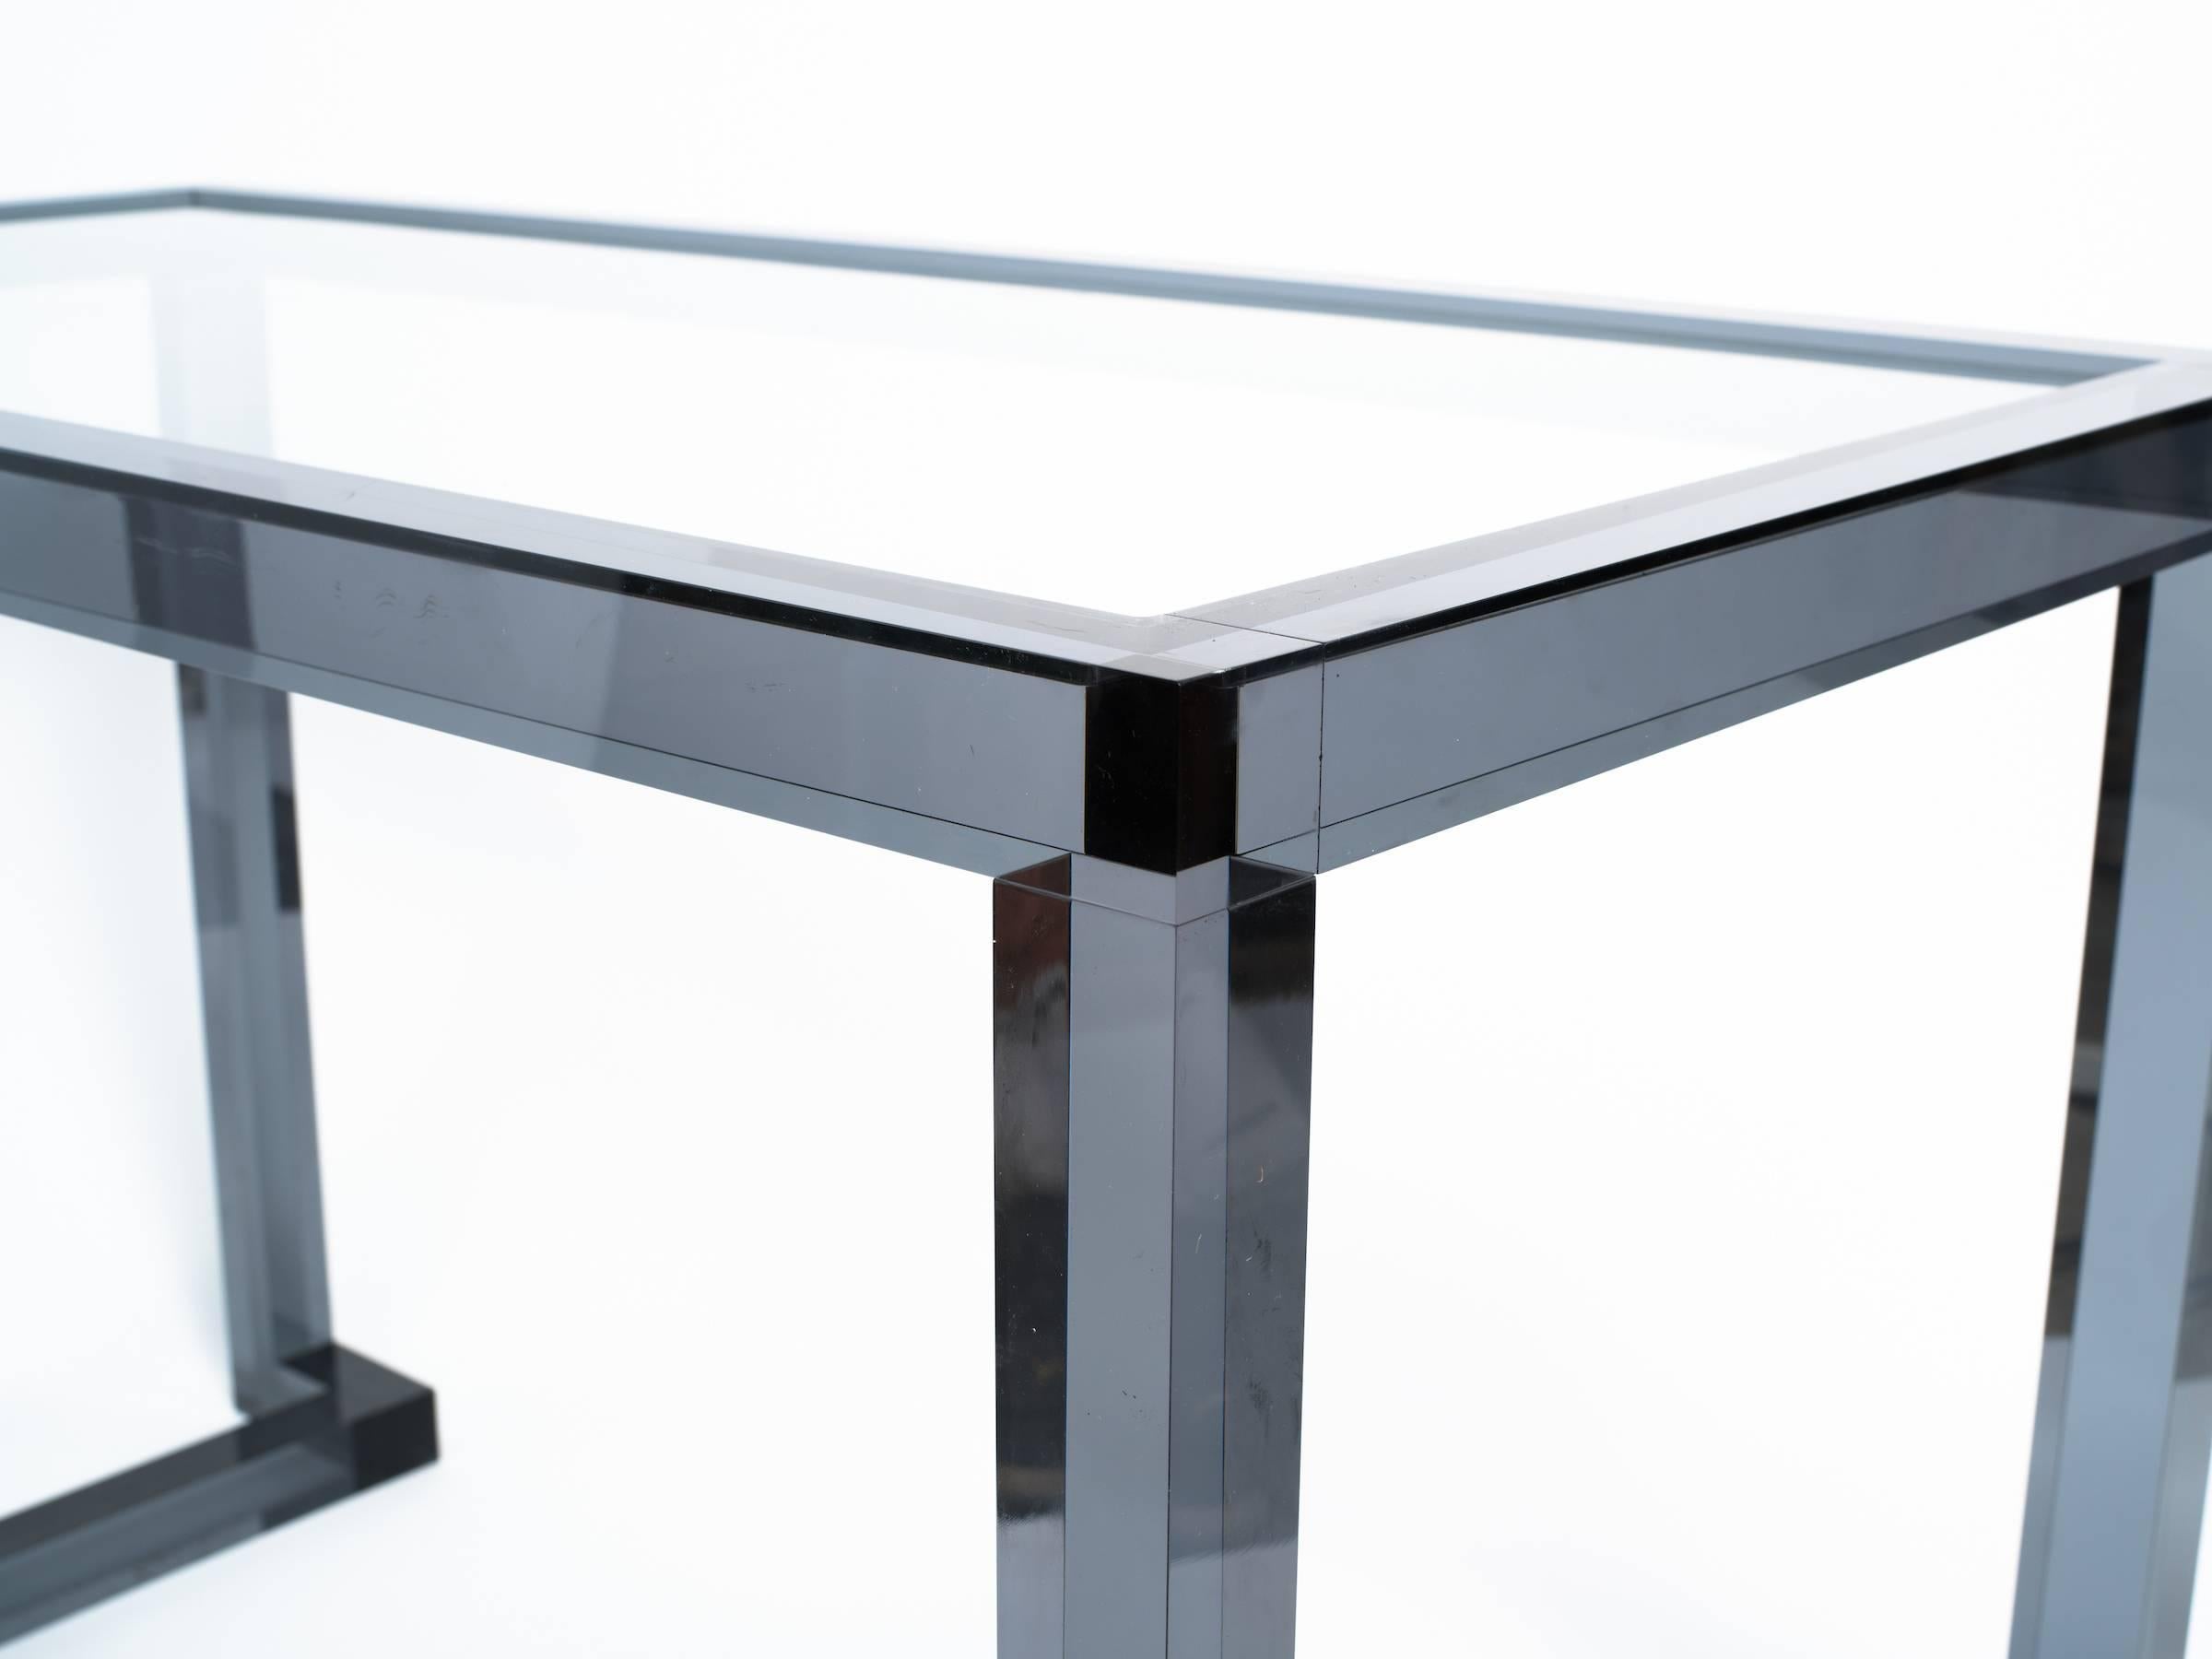 Smoked Lucite console or desk.